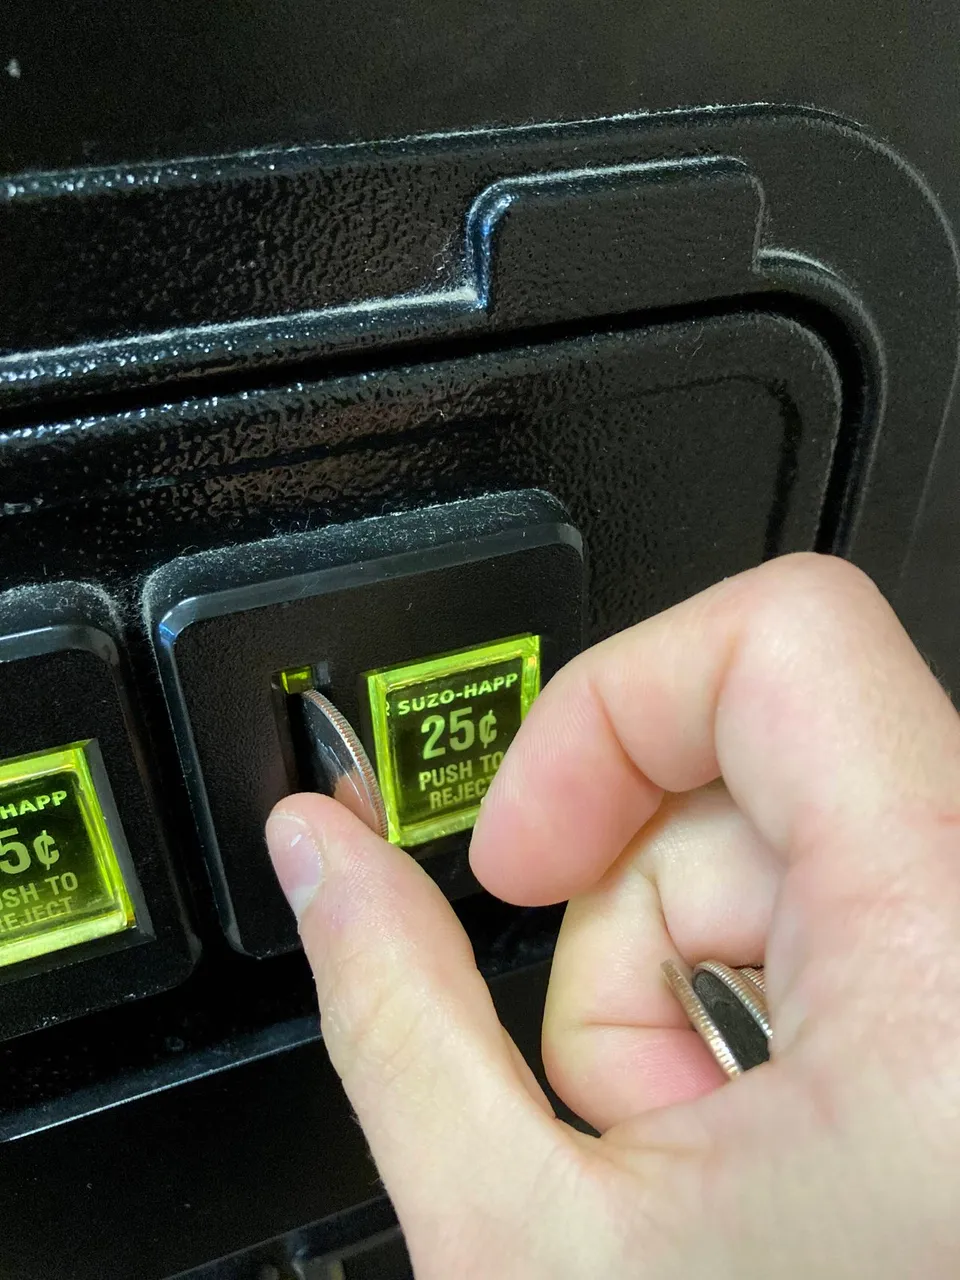 Public domain stock image of a person's hand putting quarters into a payment slot